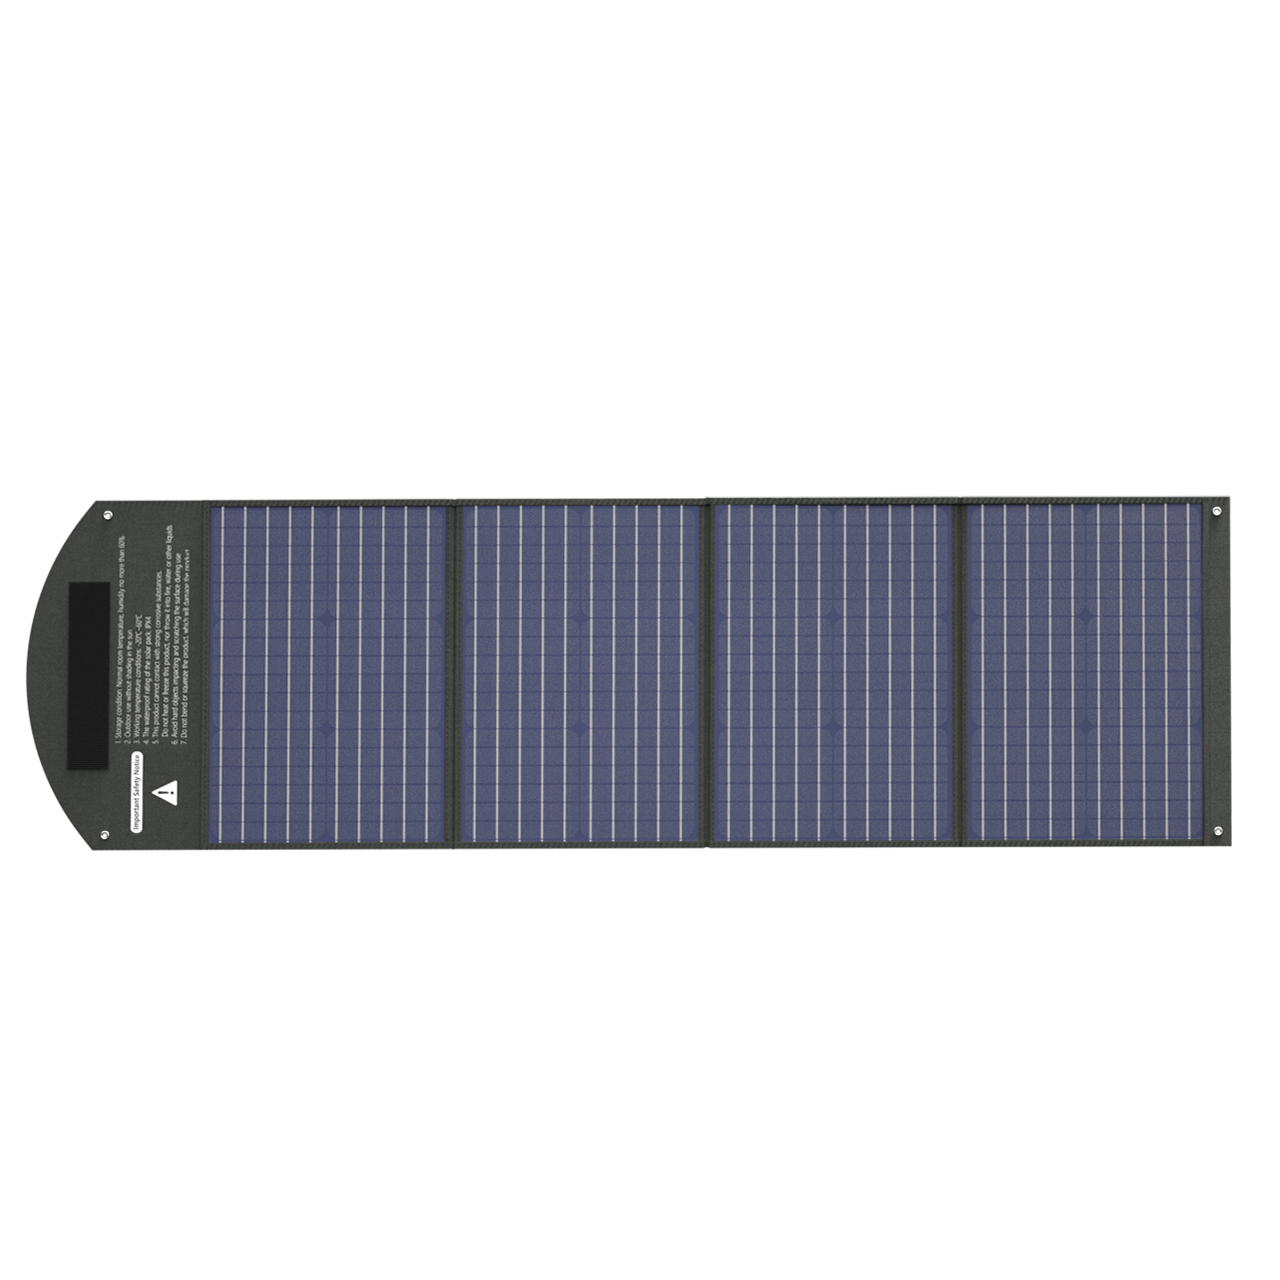 Yoobao 100w Solar Panel For Outdoor Camping Solar Charging Usb Output Dc Output For Power Station